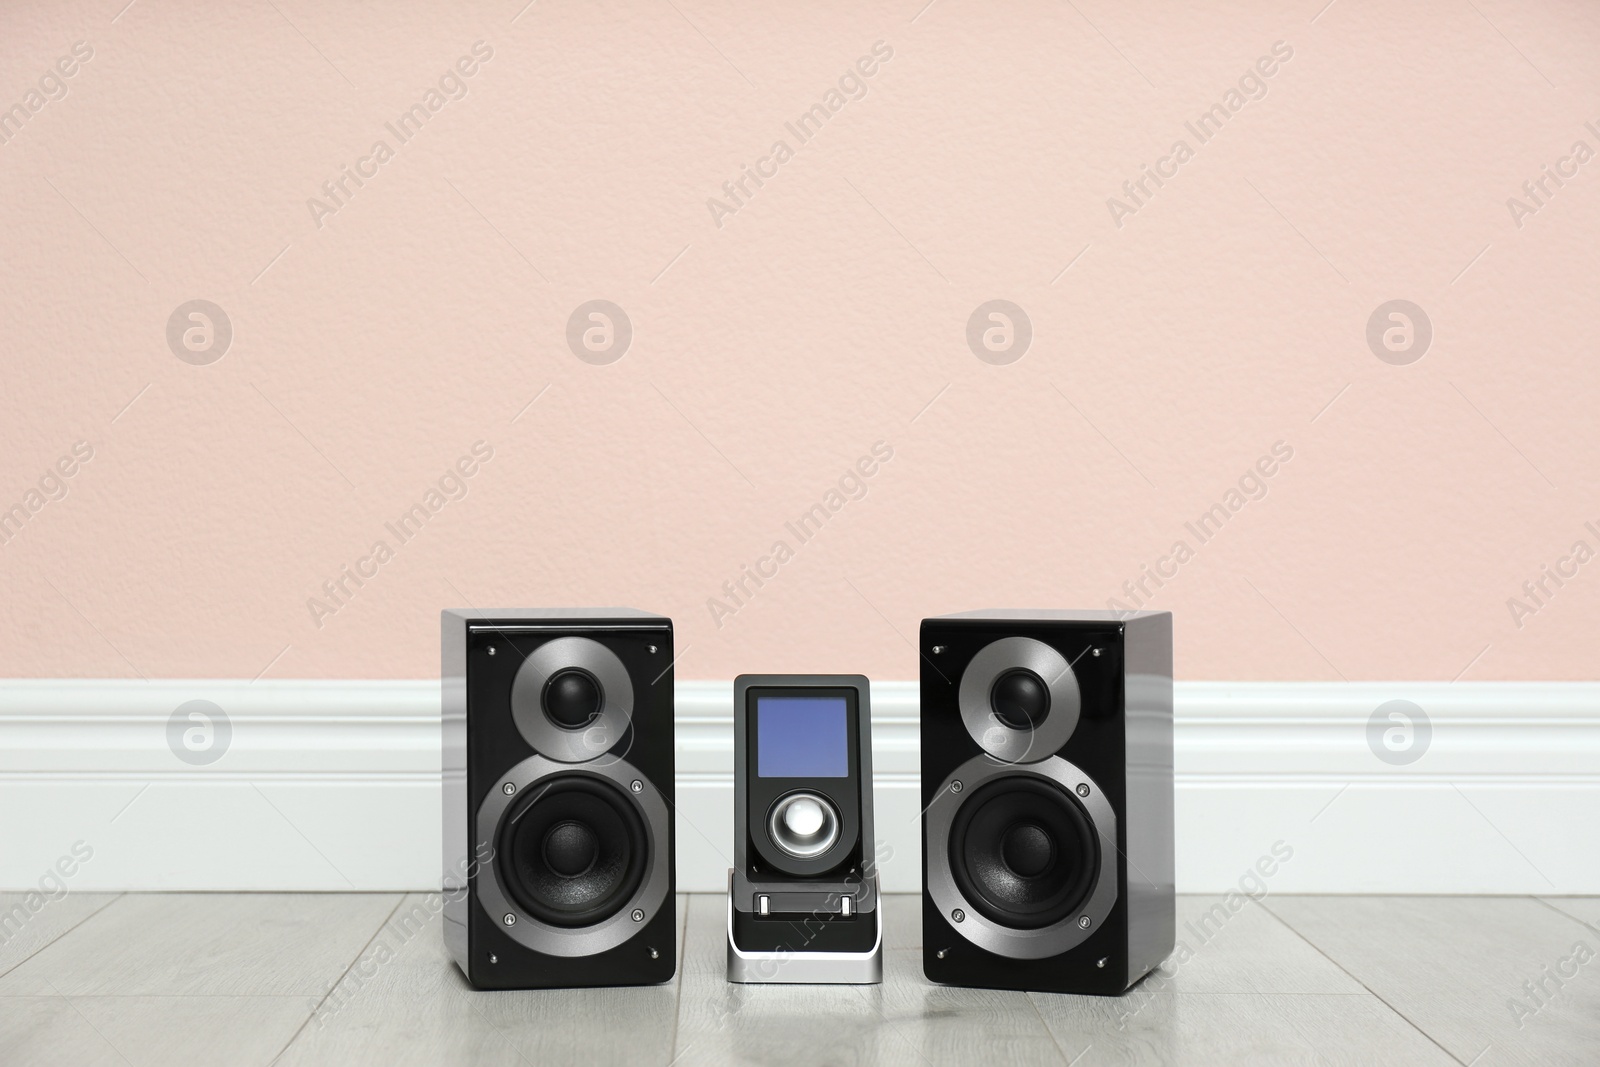 Photo of Modern powerful audio speakers and remote on floor near pink wall. Space for text